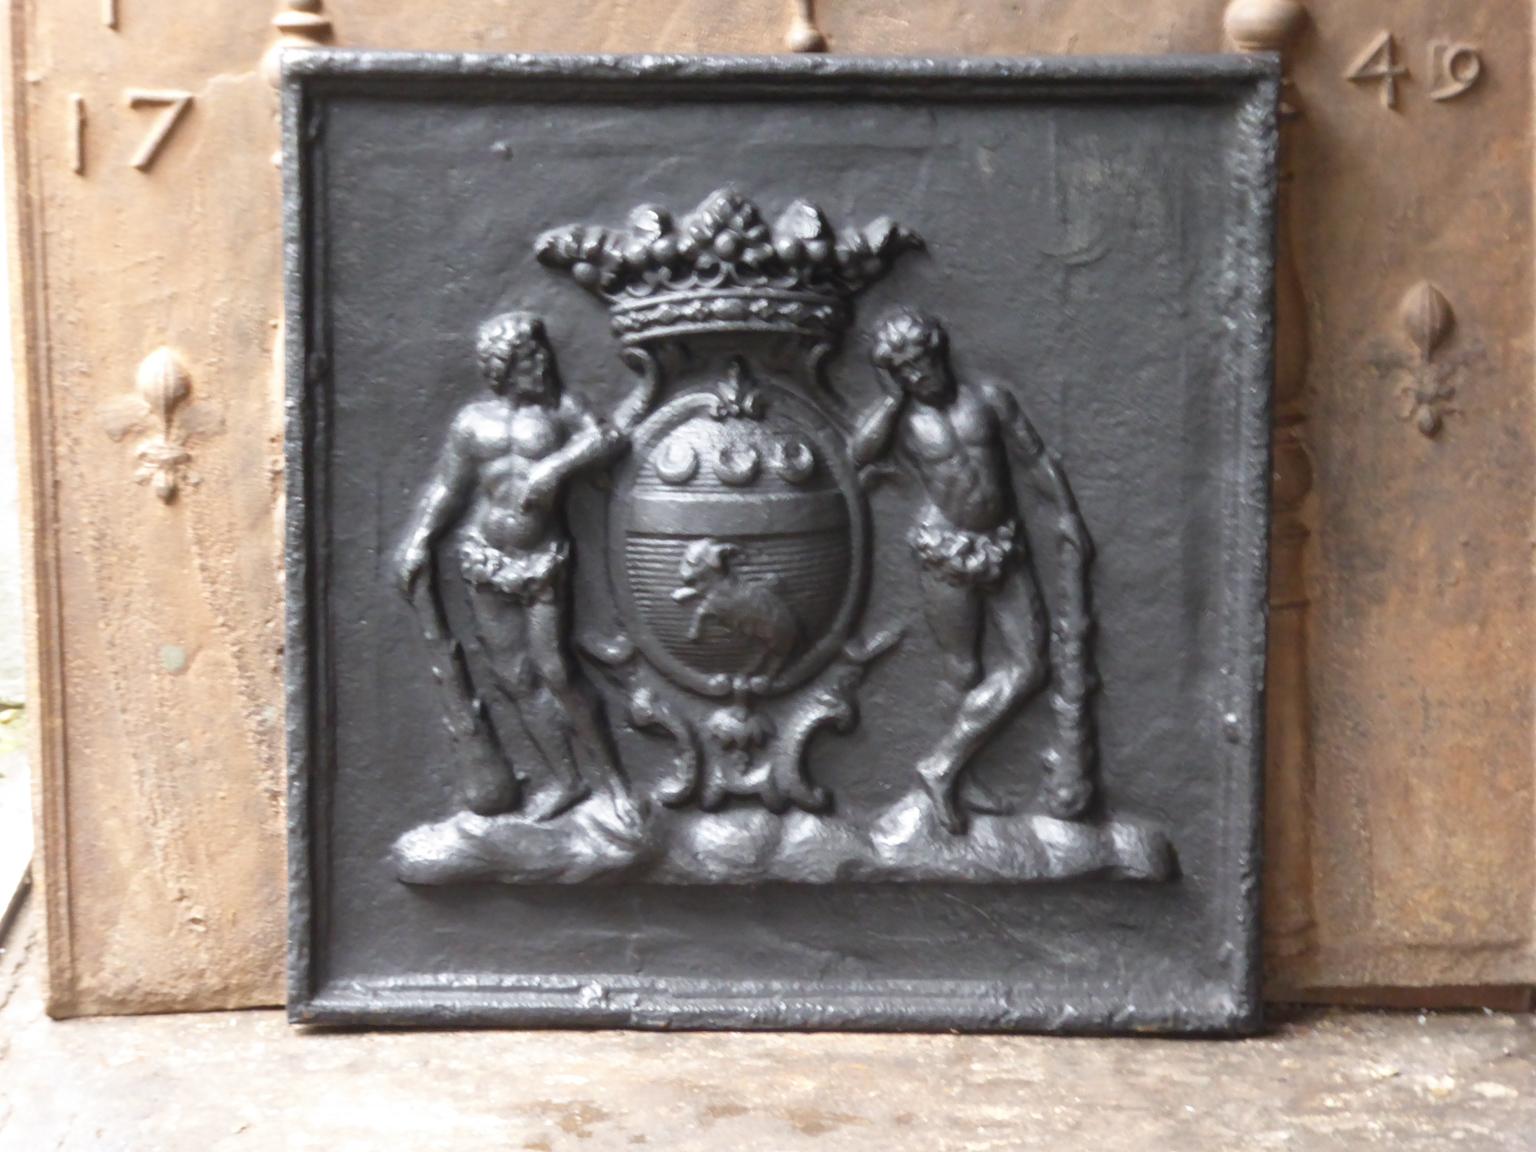 20th century French Louis XIV style fireback with an unknown coat of arms. The fireback is made of cast iron. It has a black / pewter patina. It is in a good condition and does not have cracks.

This product weighs more than 65 kg / 143 lbs. All our